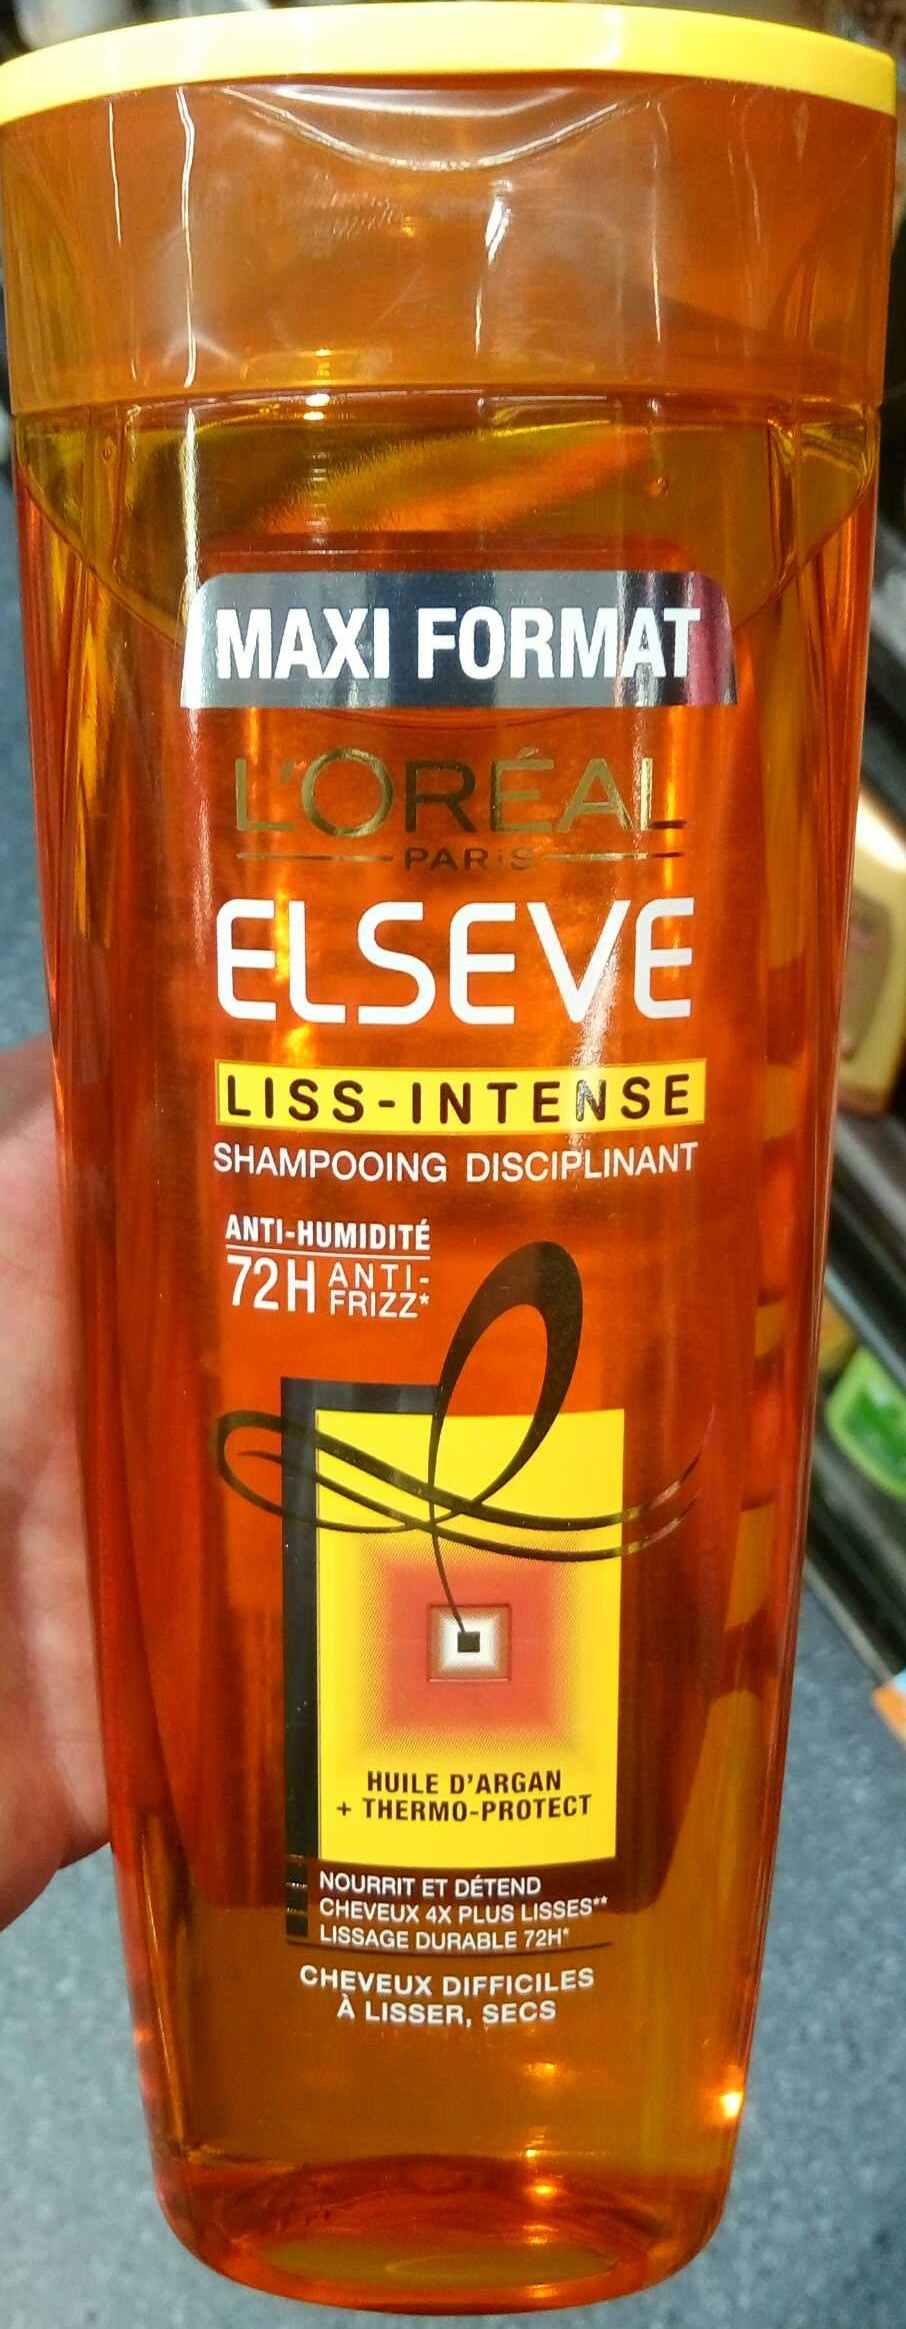 Elseve Liss-Intense Shampooing disciplinant (Maxi format) - Product - fr